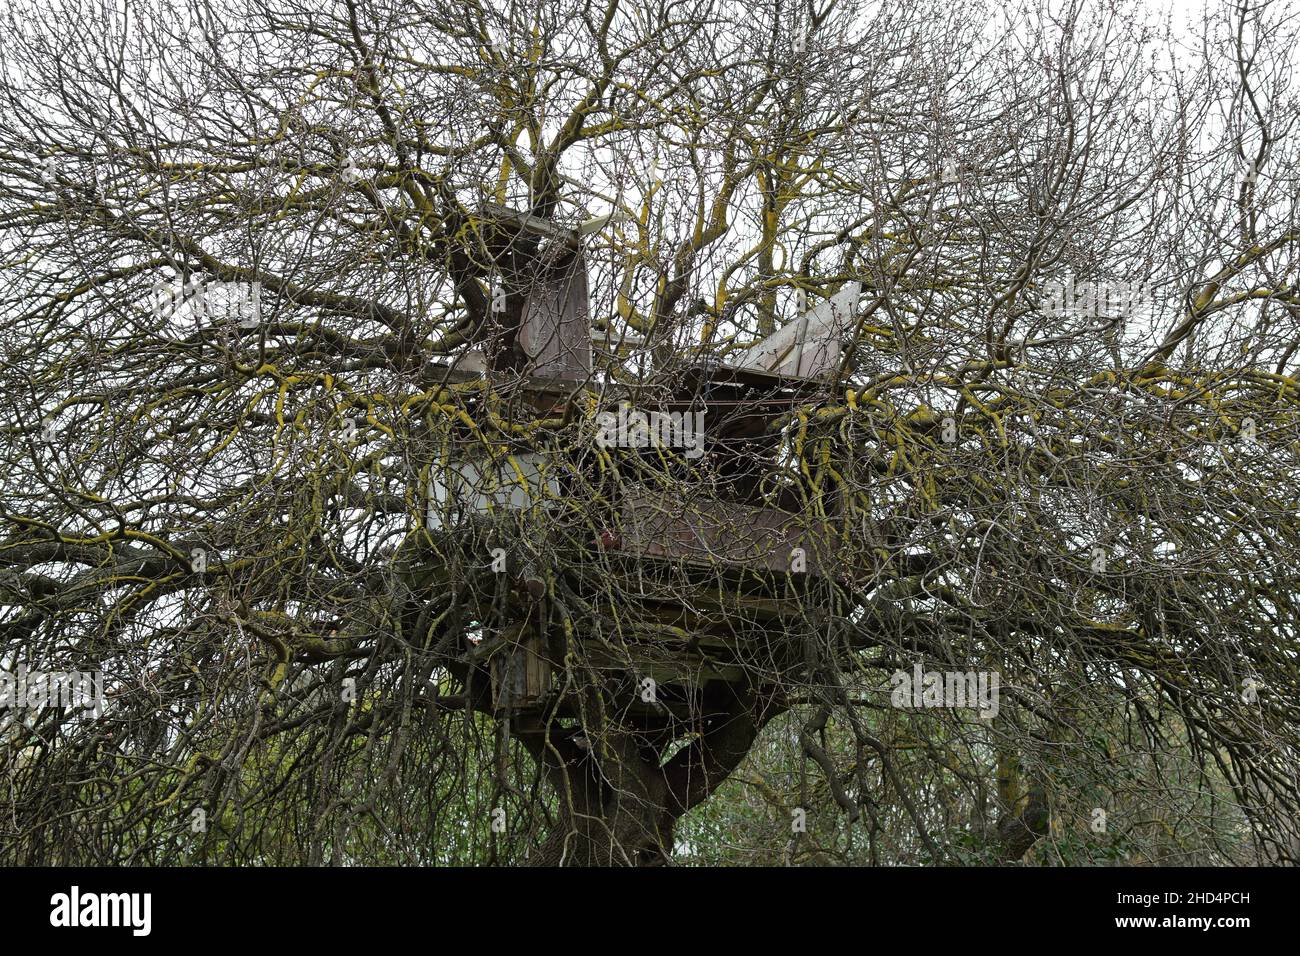 Ruins of an old wooden tree house among branches. Stock Photo